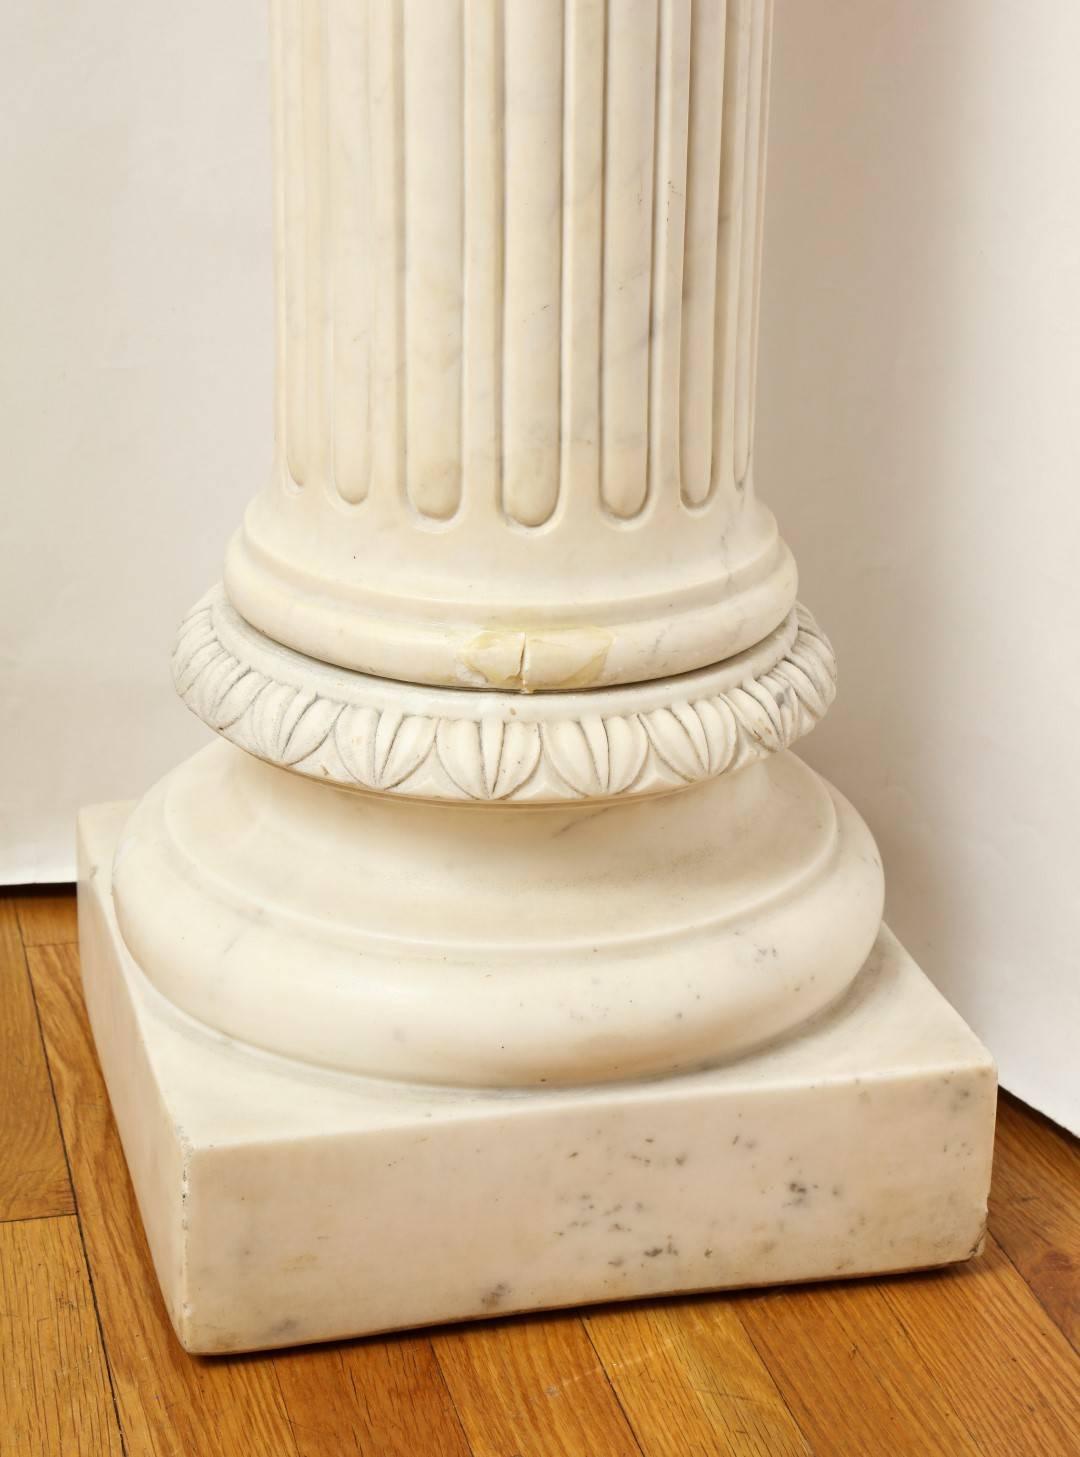 Carved A Marble Corinthian Capital Architectural Pedestal